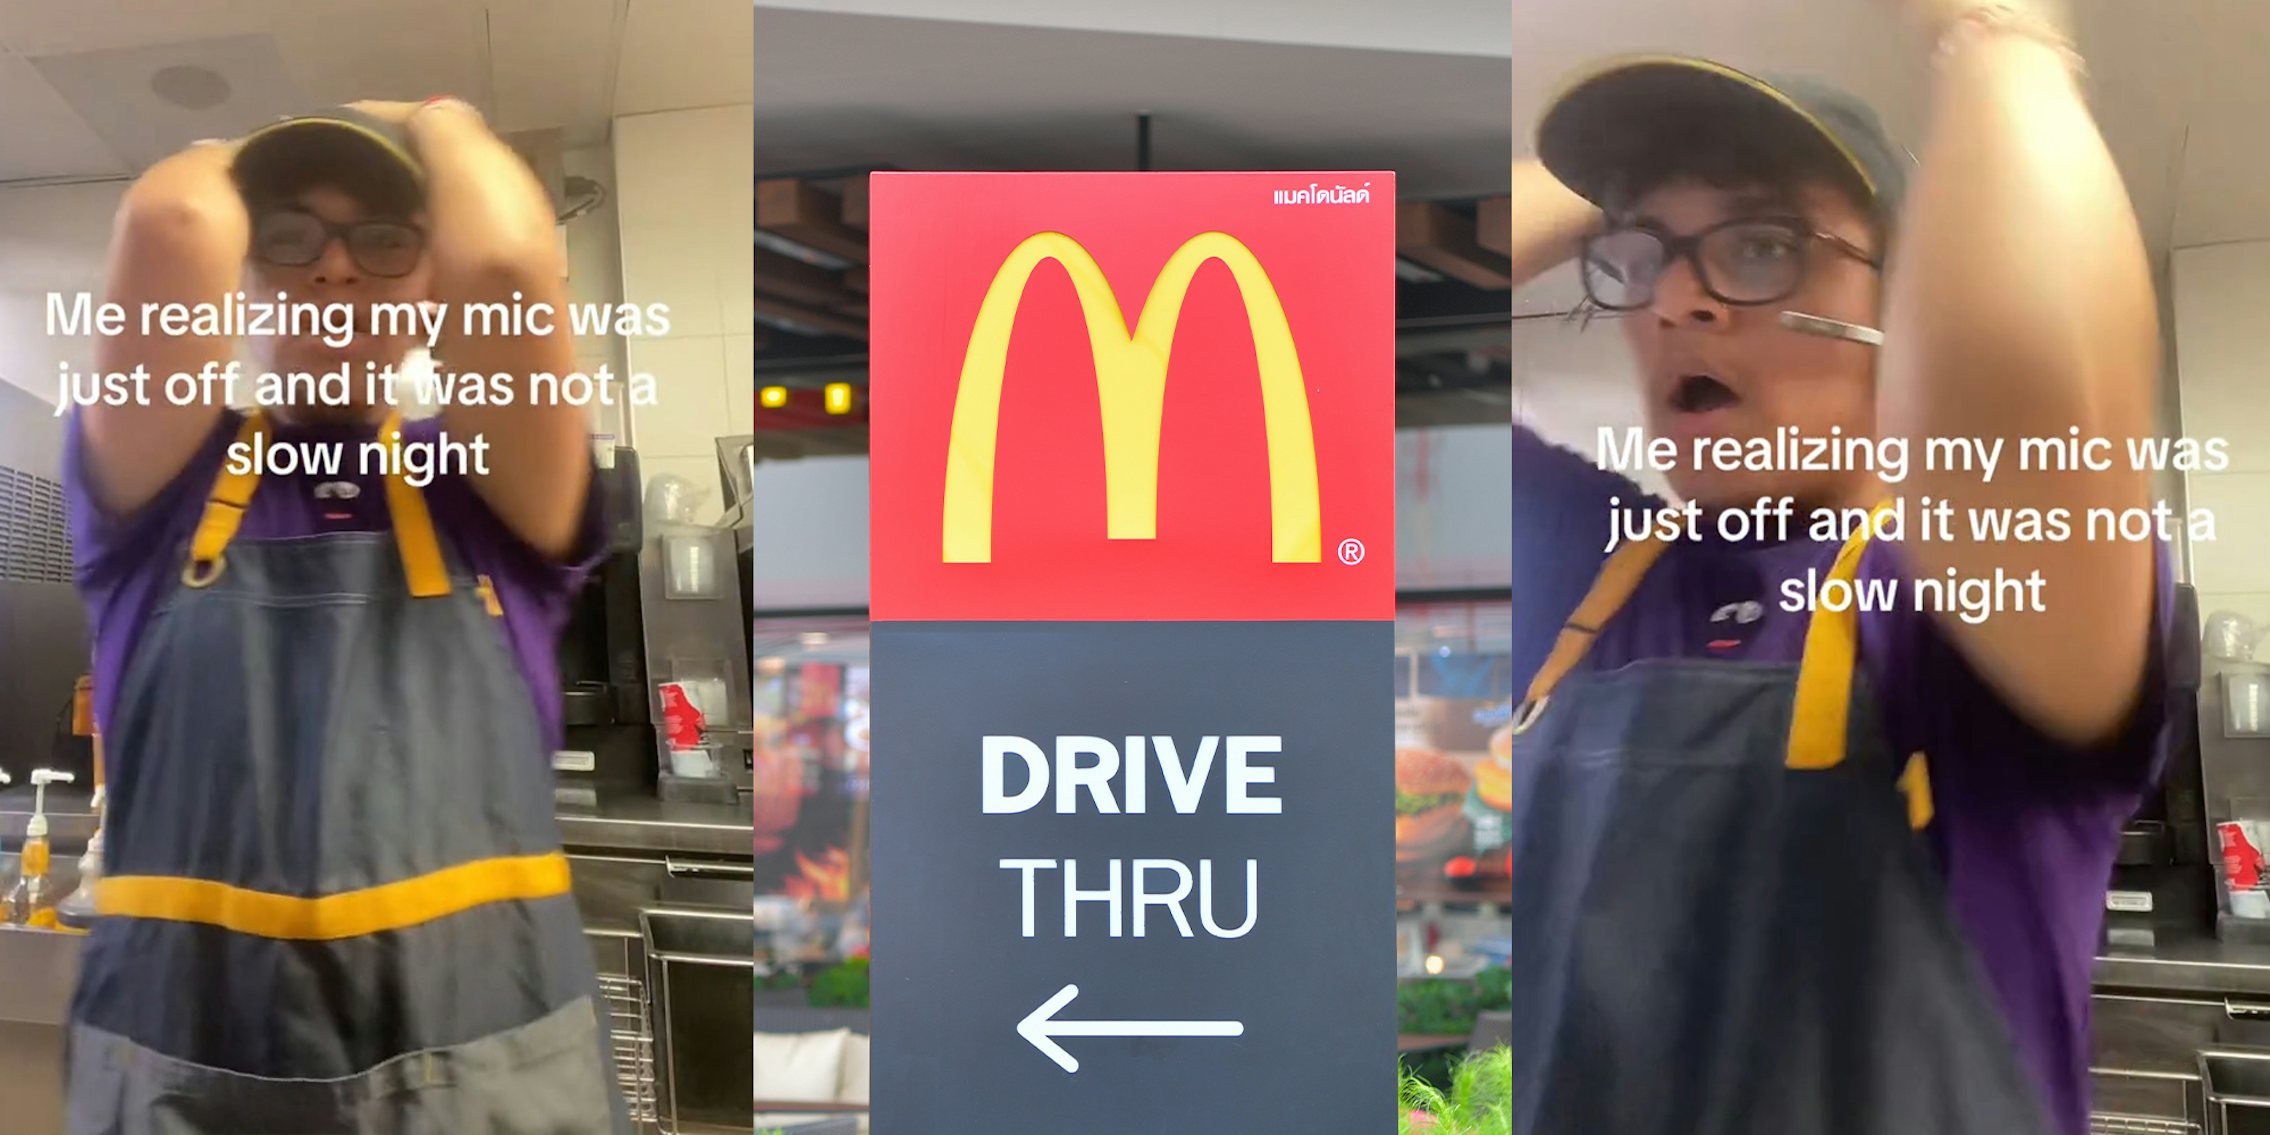 McDonald's worker doesn't realize drive-thru mic is turned off, misses orders